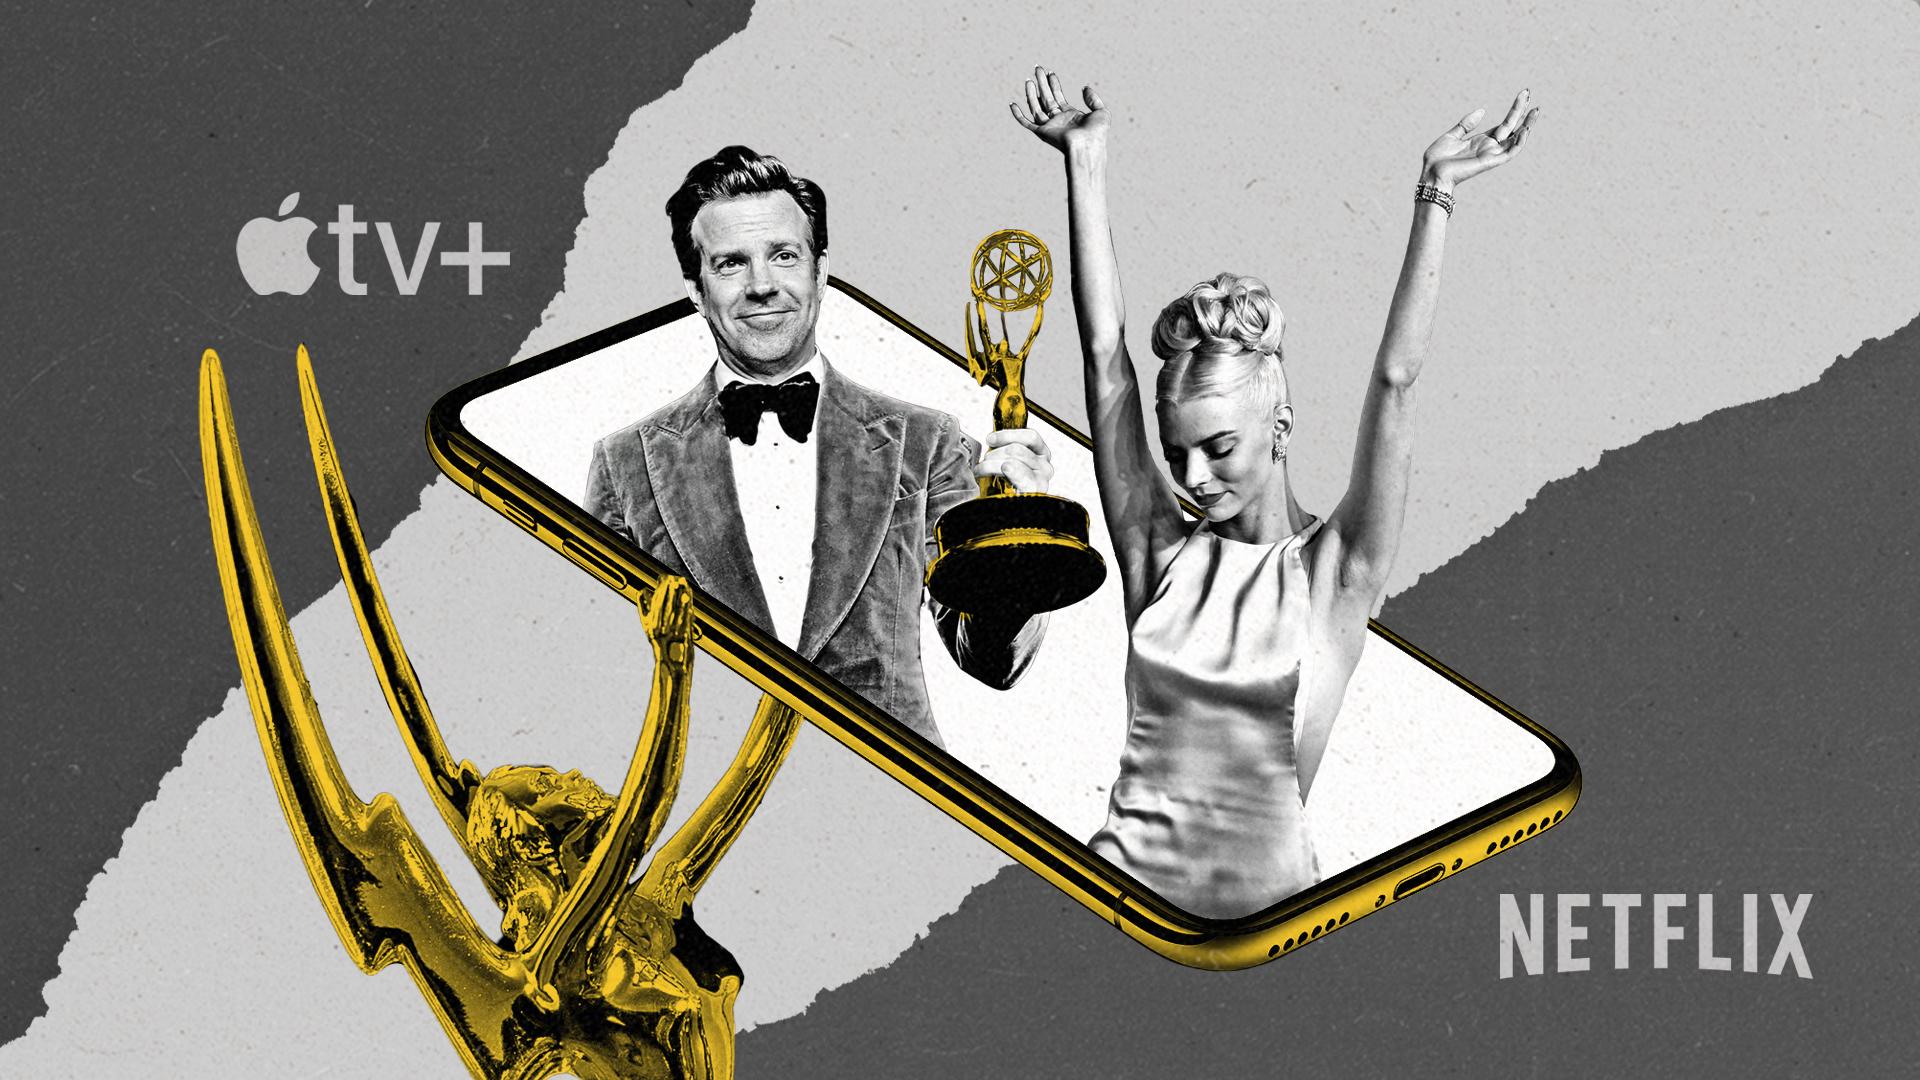 From ‘Ted Lasso’ to ‘The Queen’s Gambit:’ Why streaming platforms dominated the Emmys